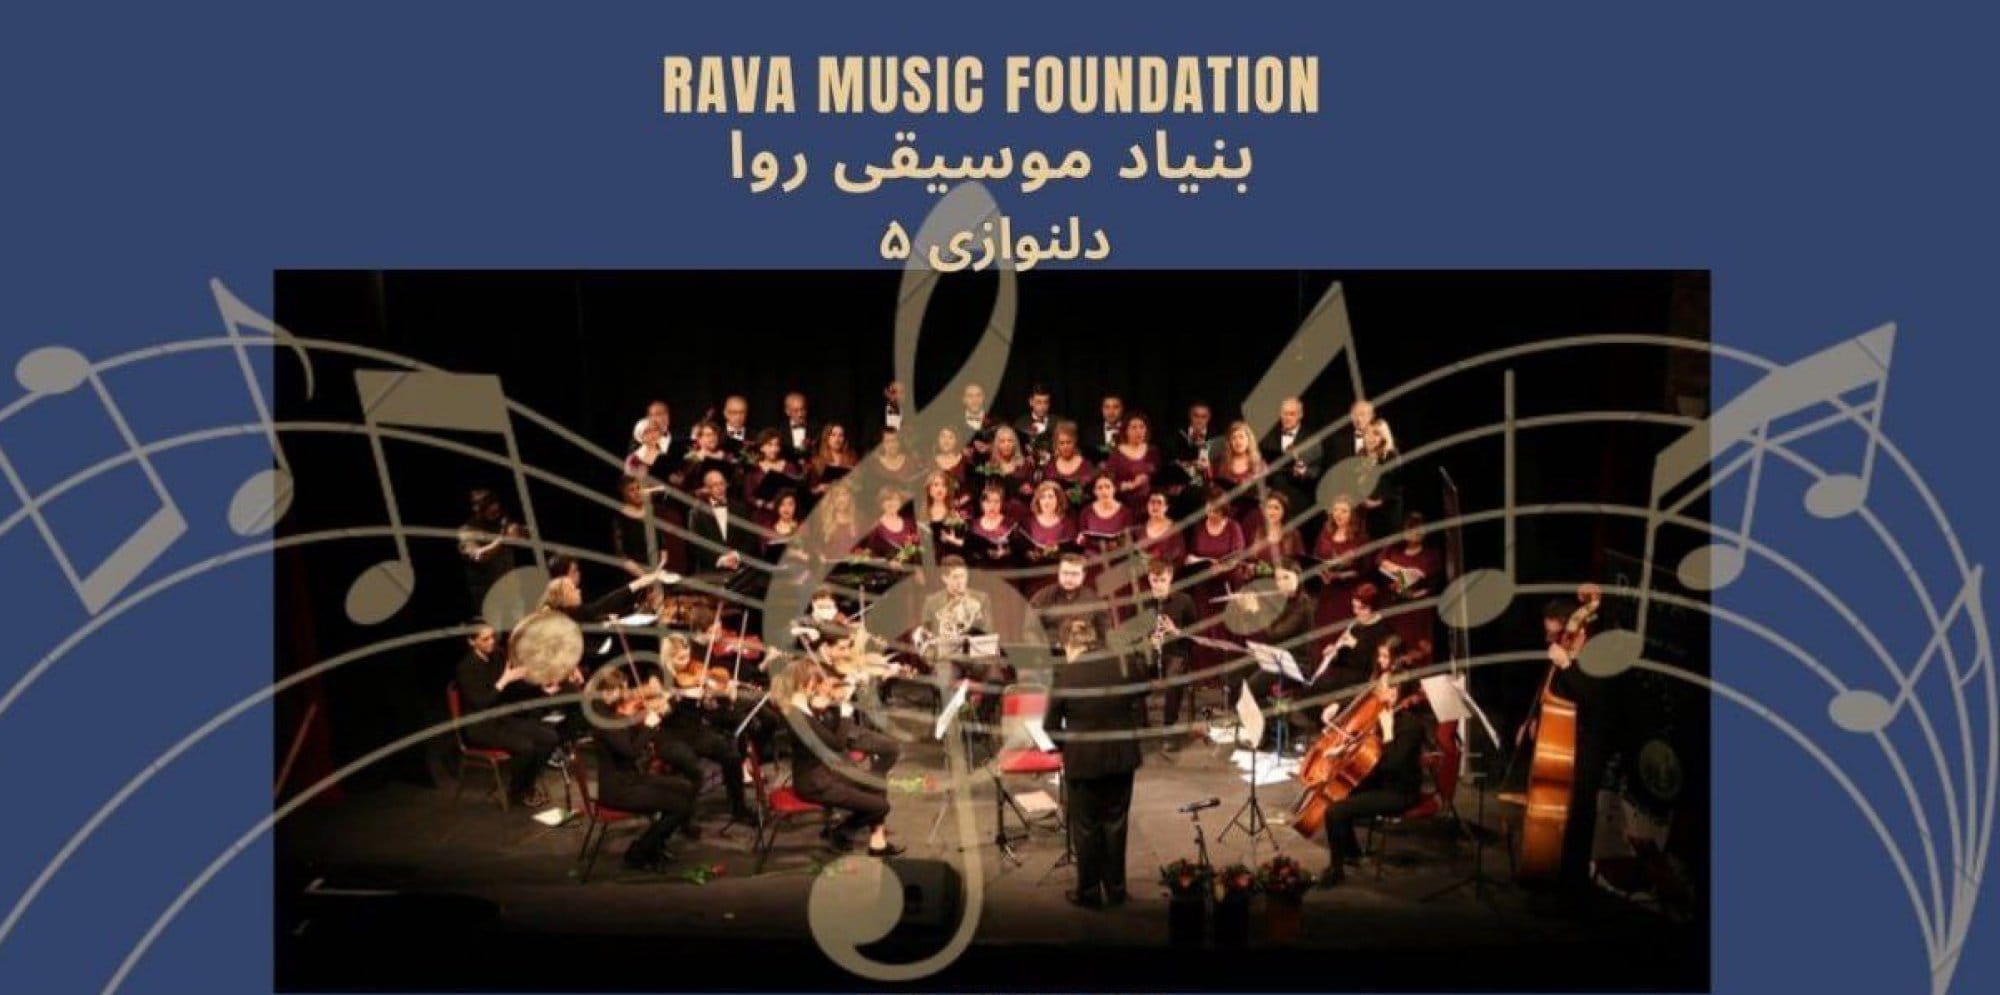 Raam Music Foundation. A choir and orchestra play